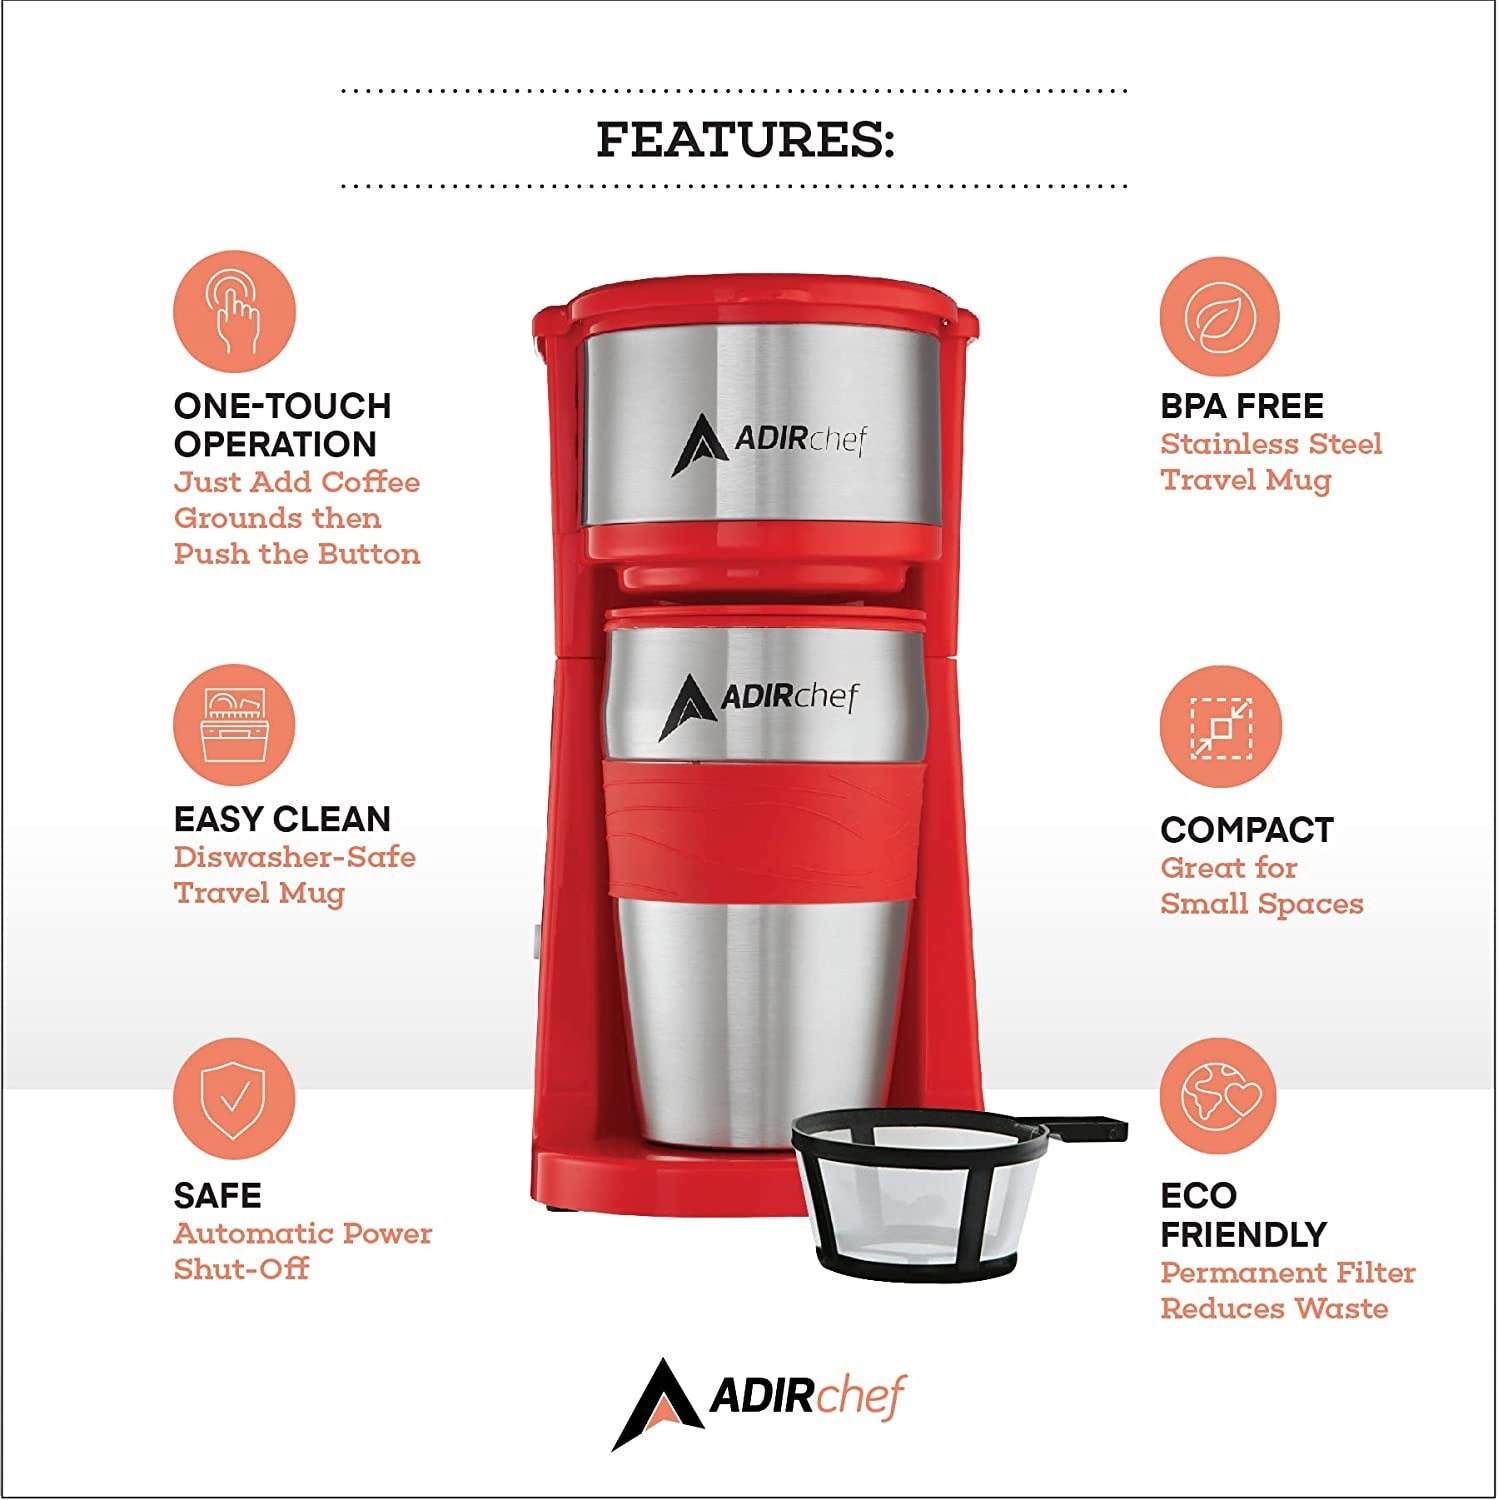 AdirChef Single Serve Mini Travel Coffee Maker & 15 oz. Travel Mug Coffee Tumbler & Reusable Filter for Home, Office, Camping, Portable Small and Compact for Fathers Day (Orange)